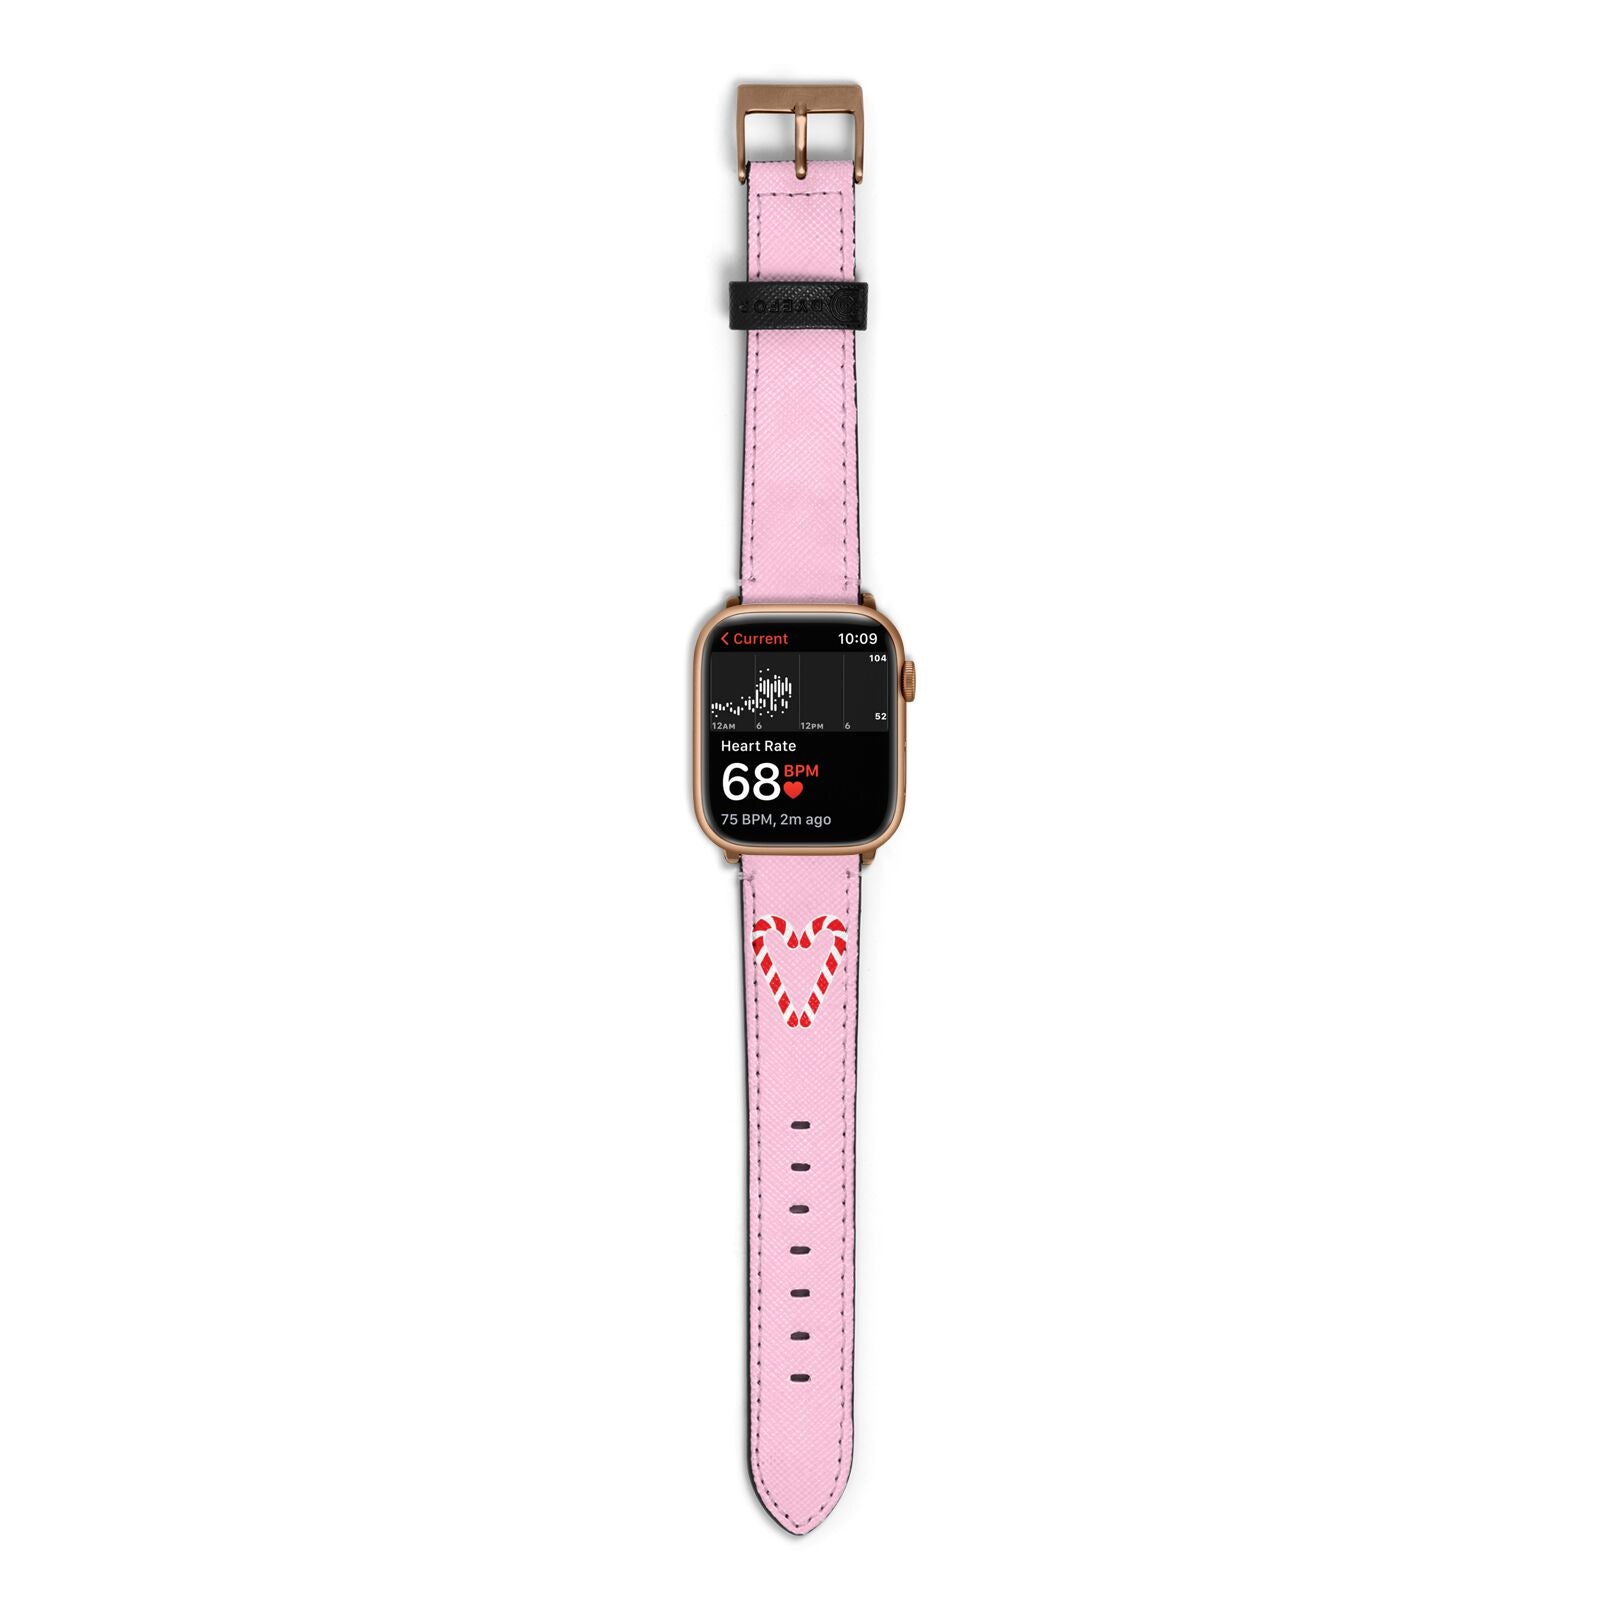 Candy Cane Heart Apple Watch Strap Size 38mm with Gold Hardware